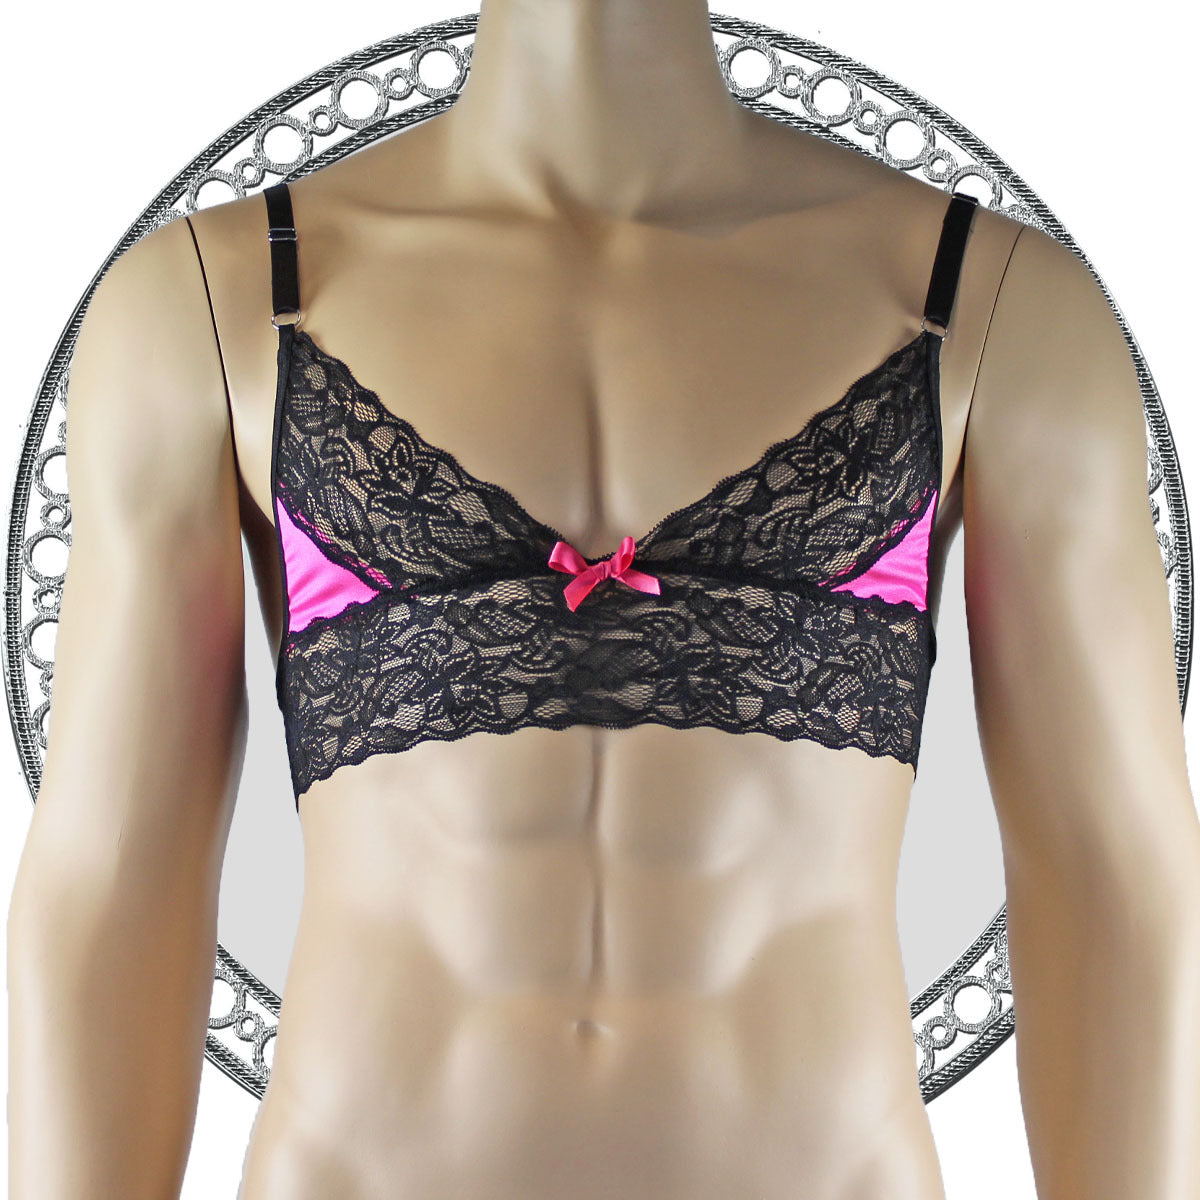 Mens Joanne Lace Bra Top Lingerie and Thong for Men Hot Pink and Black Lace